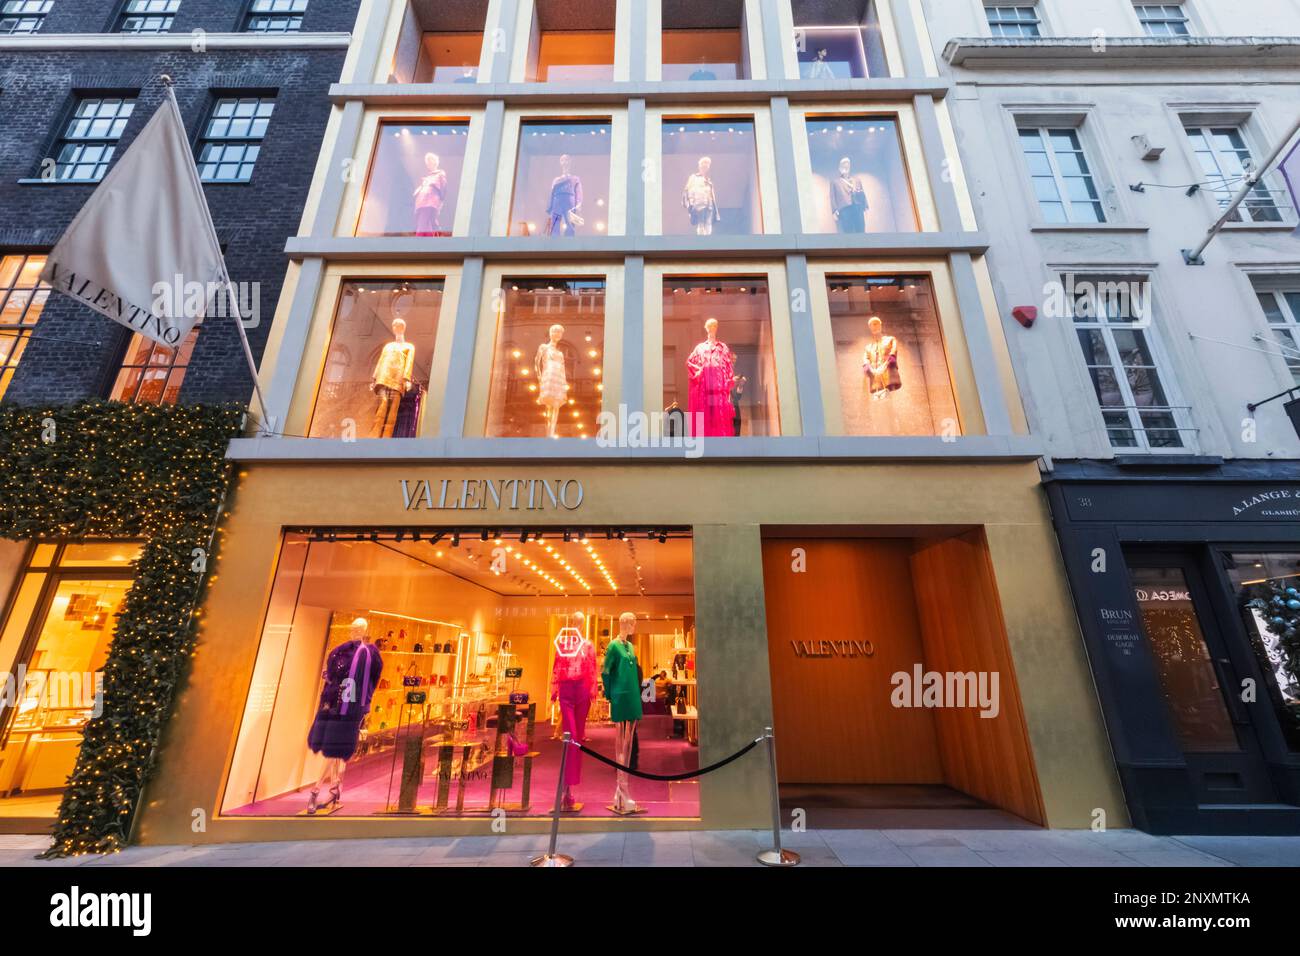 England, London, Piccadilly, New Bond Street, Exterior Façade View of Valentino Store Stock Photo